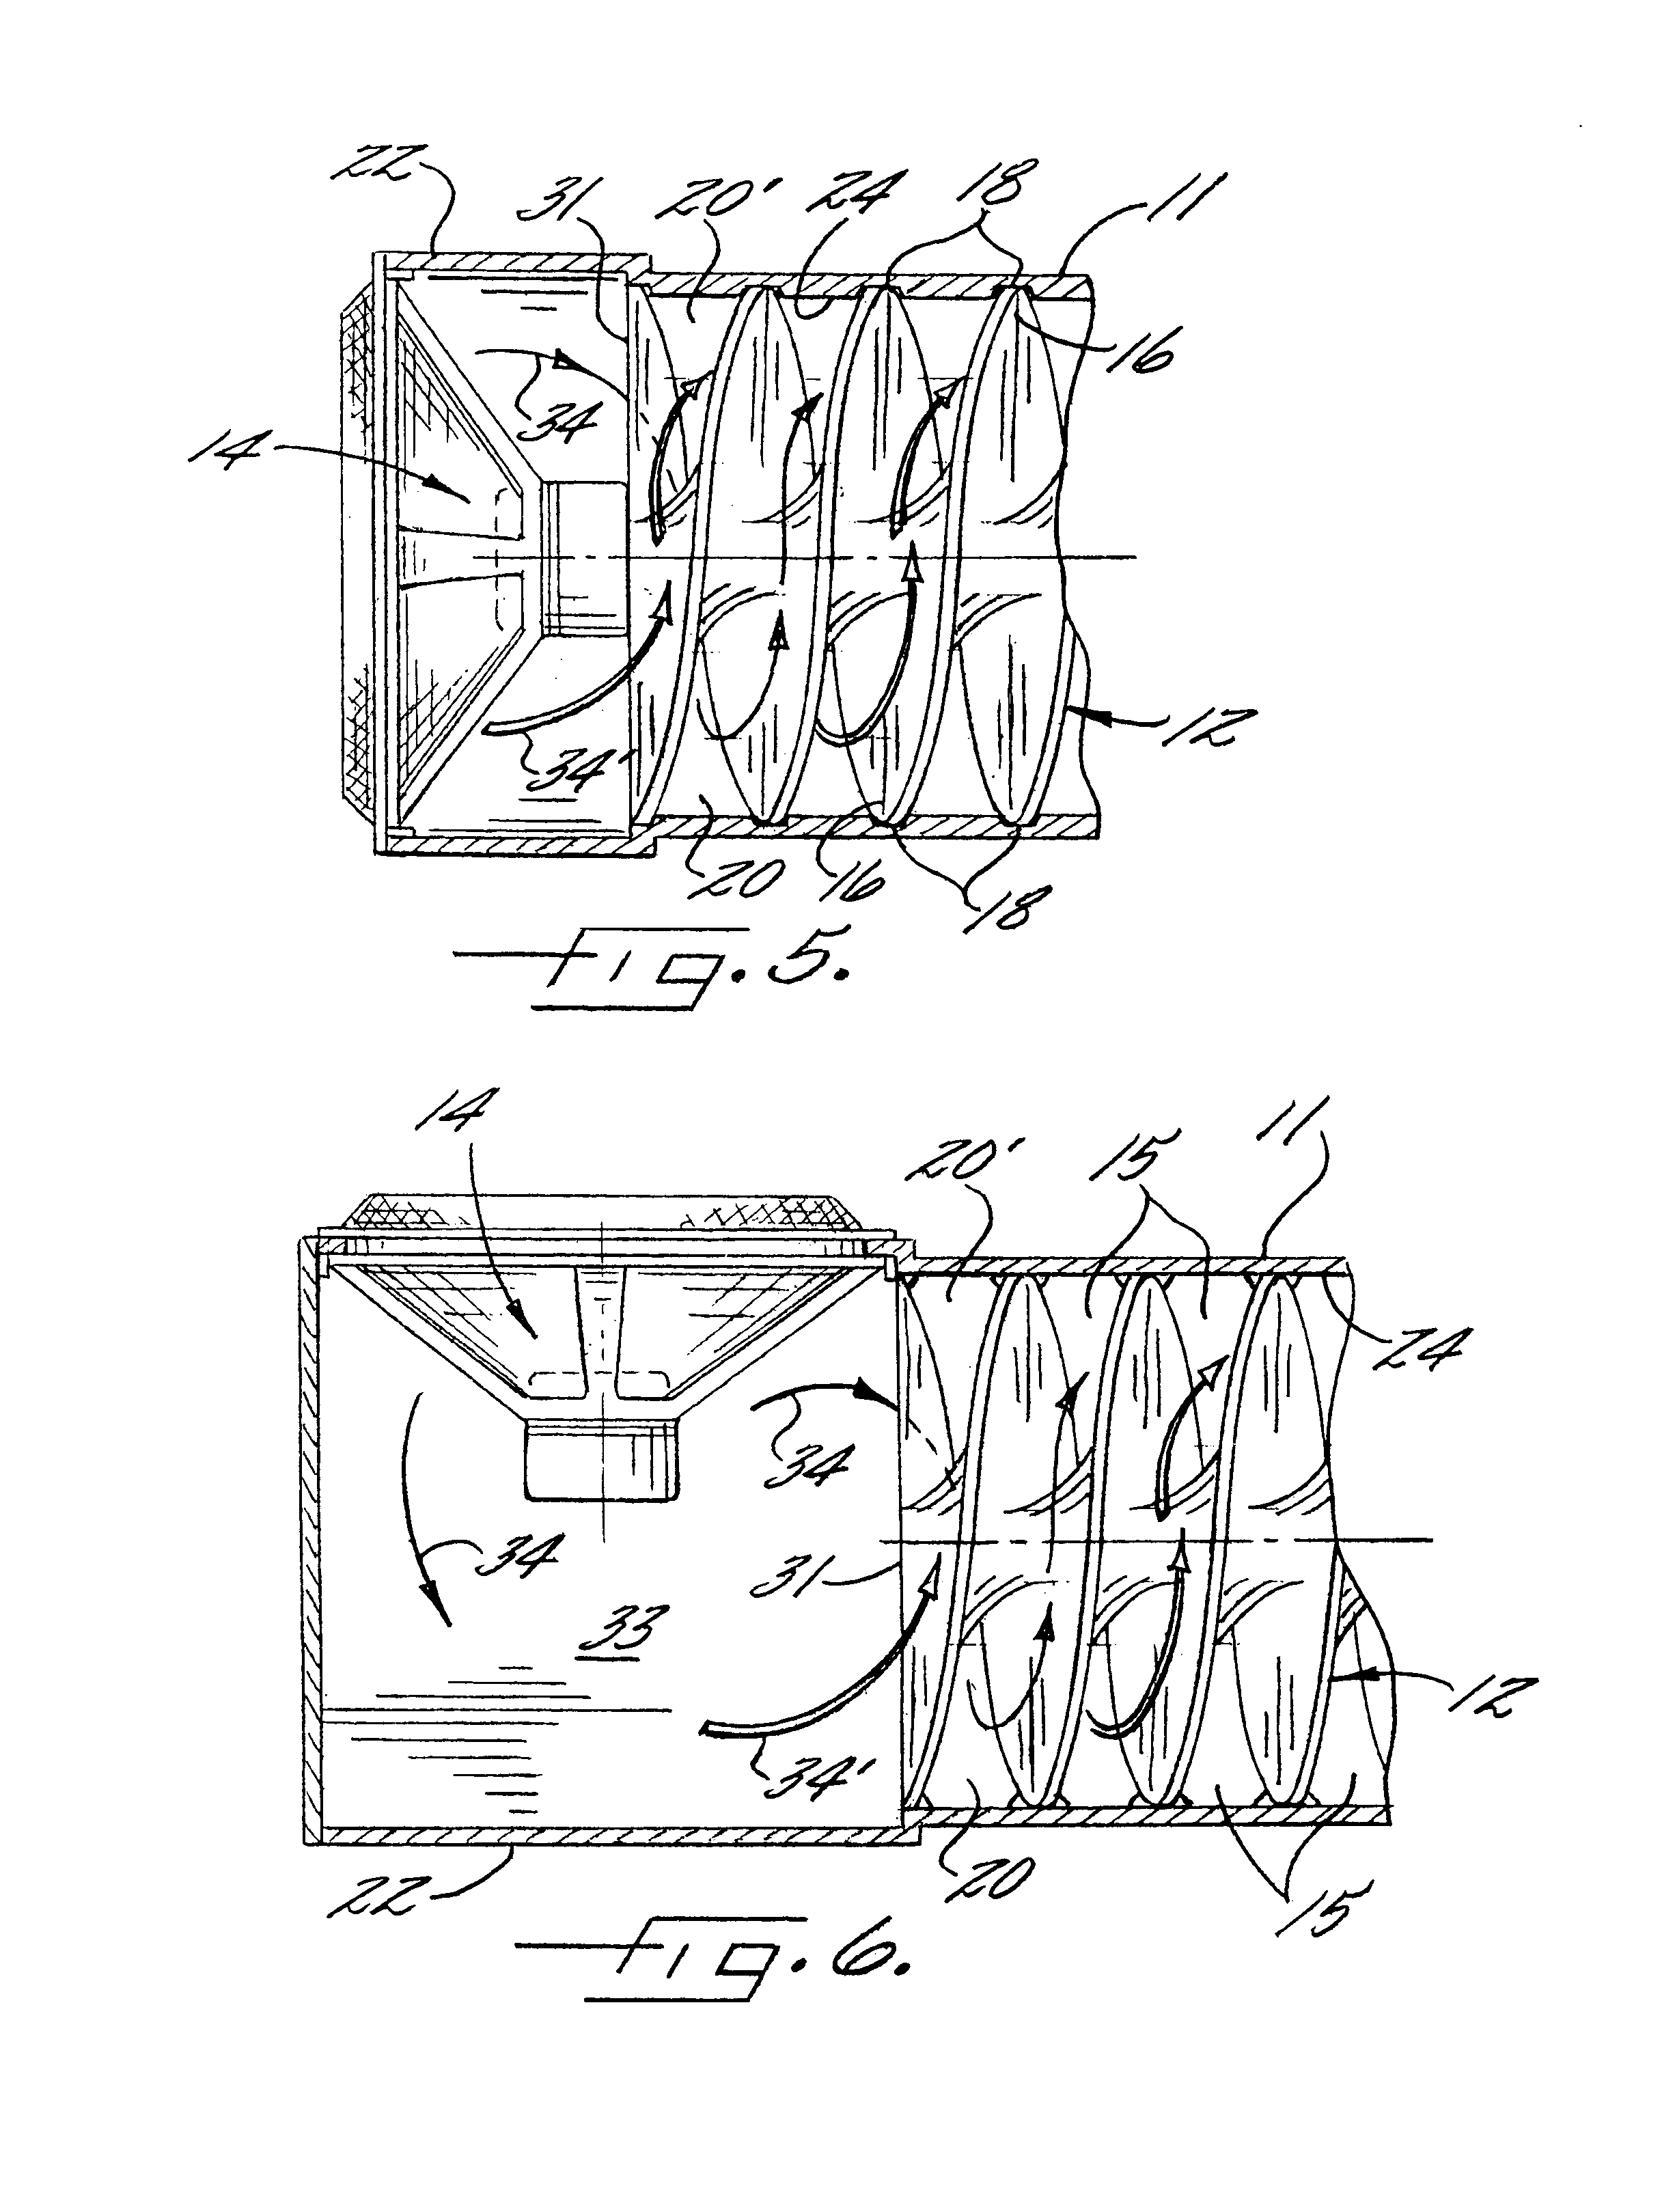 Apparatus for increasing the quality of sound from an acoustic source